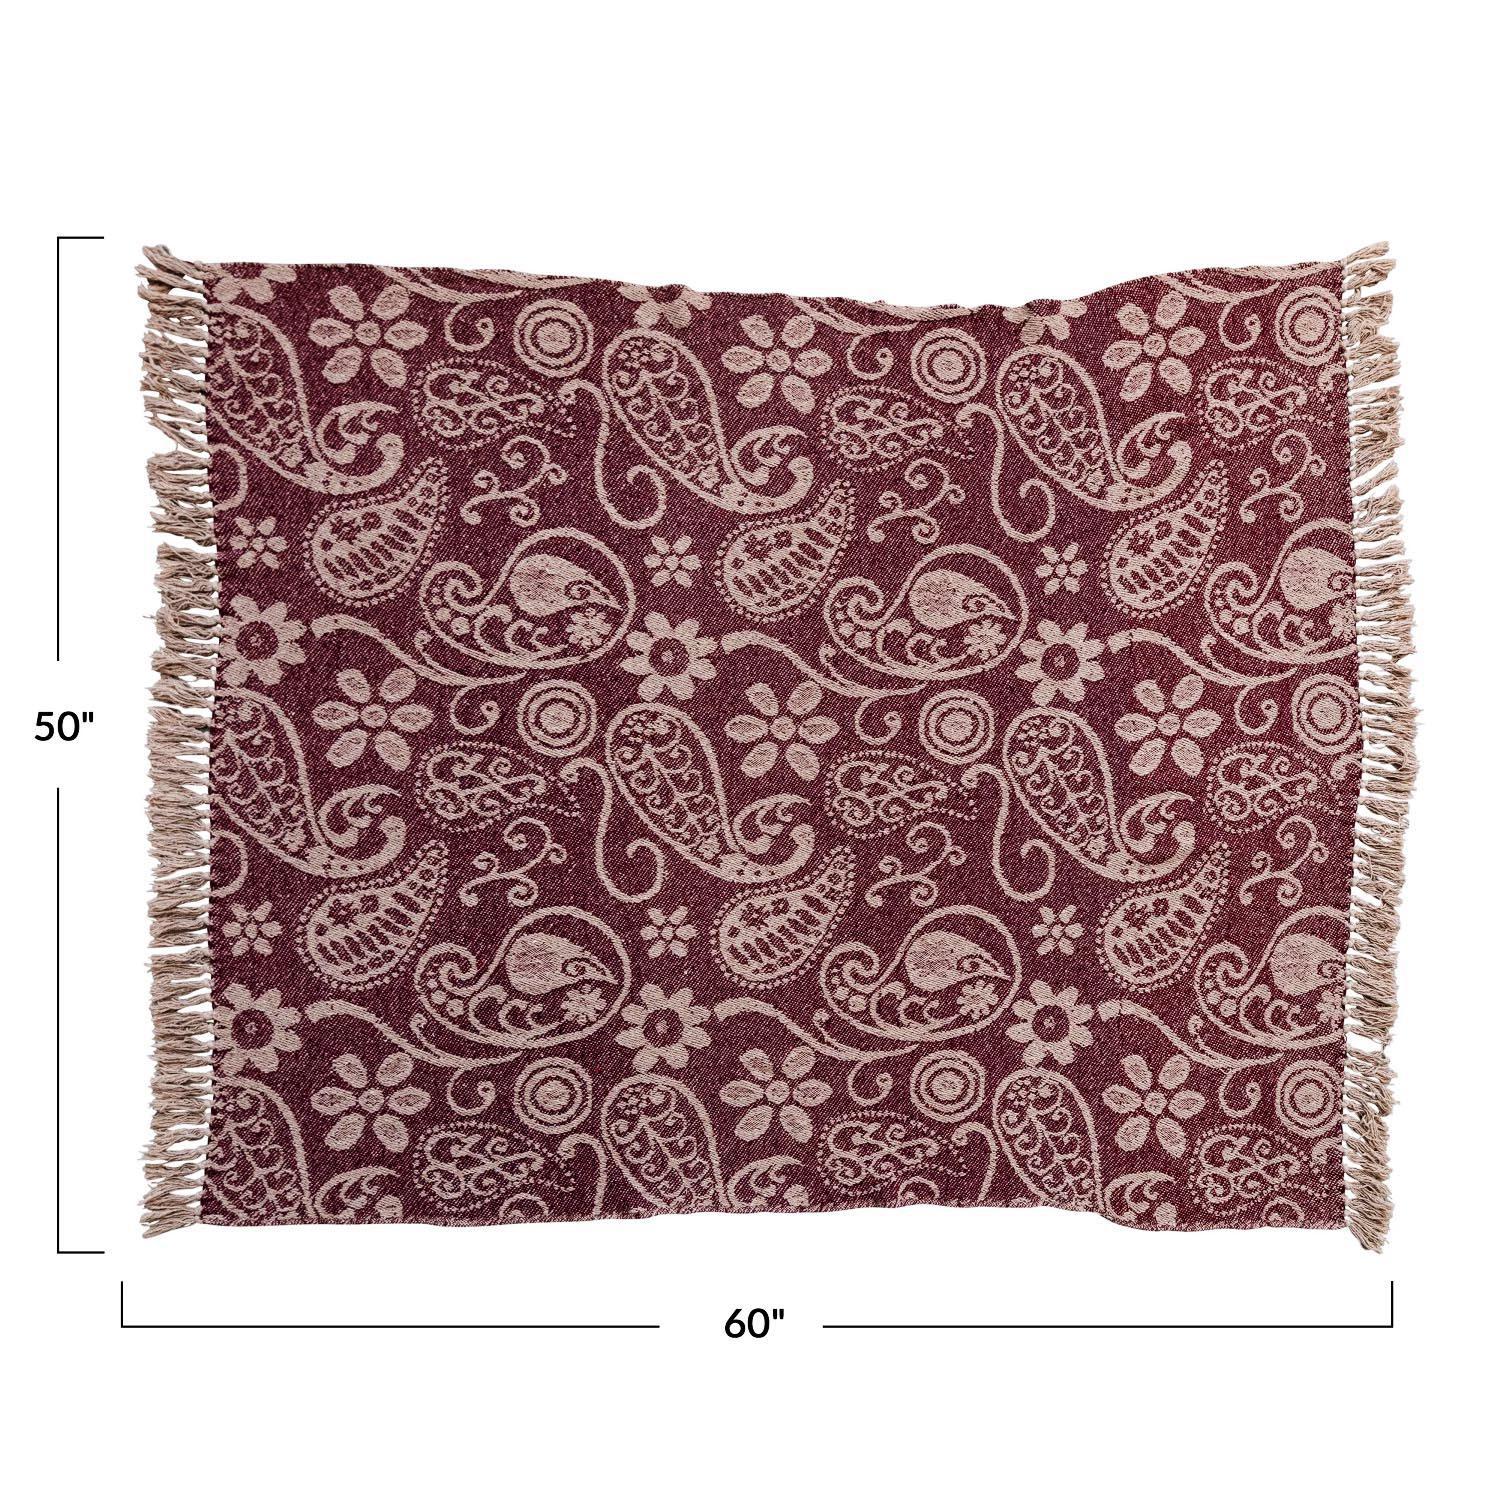 Red and beige Recycled Cotton Throw showing the dimentions 60" x 50"